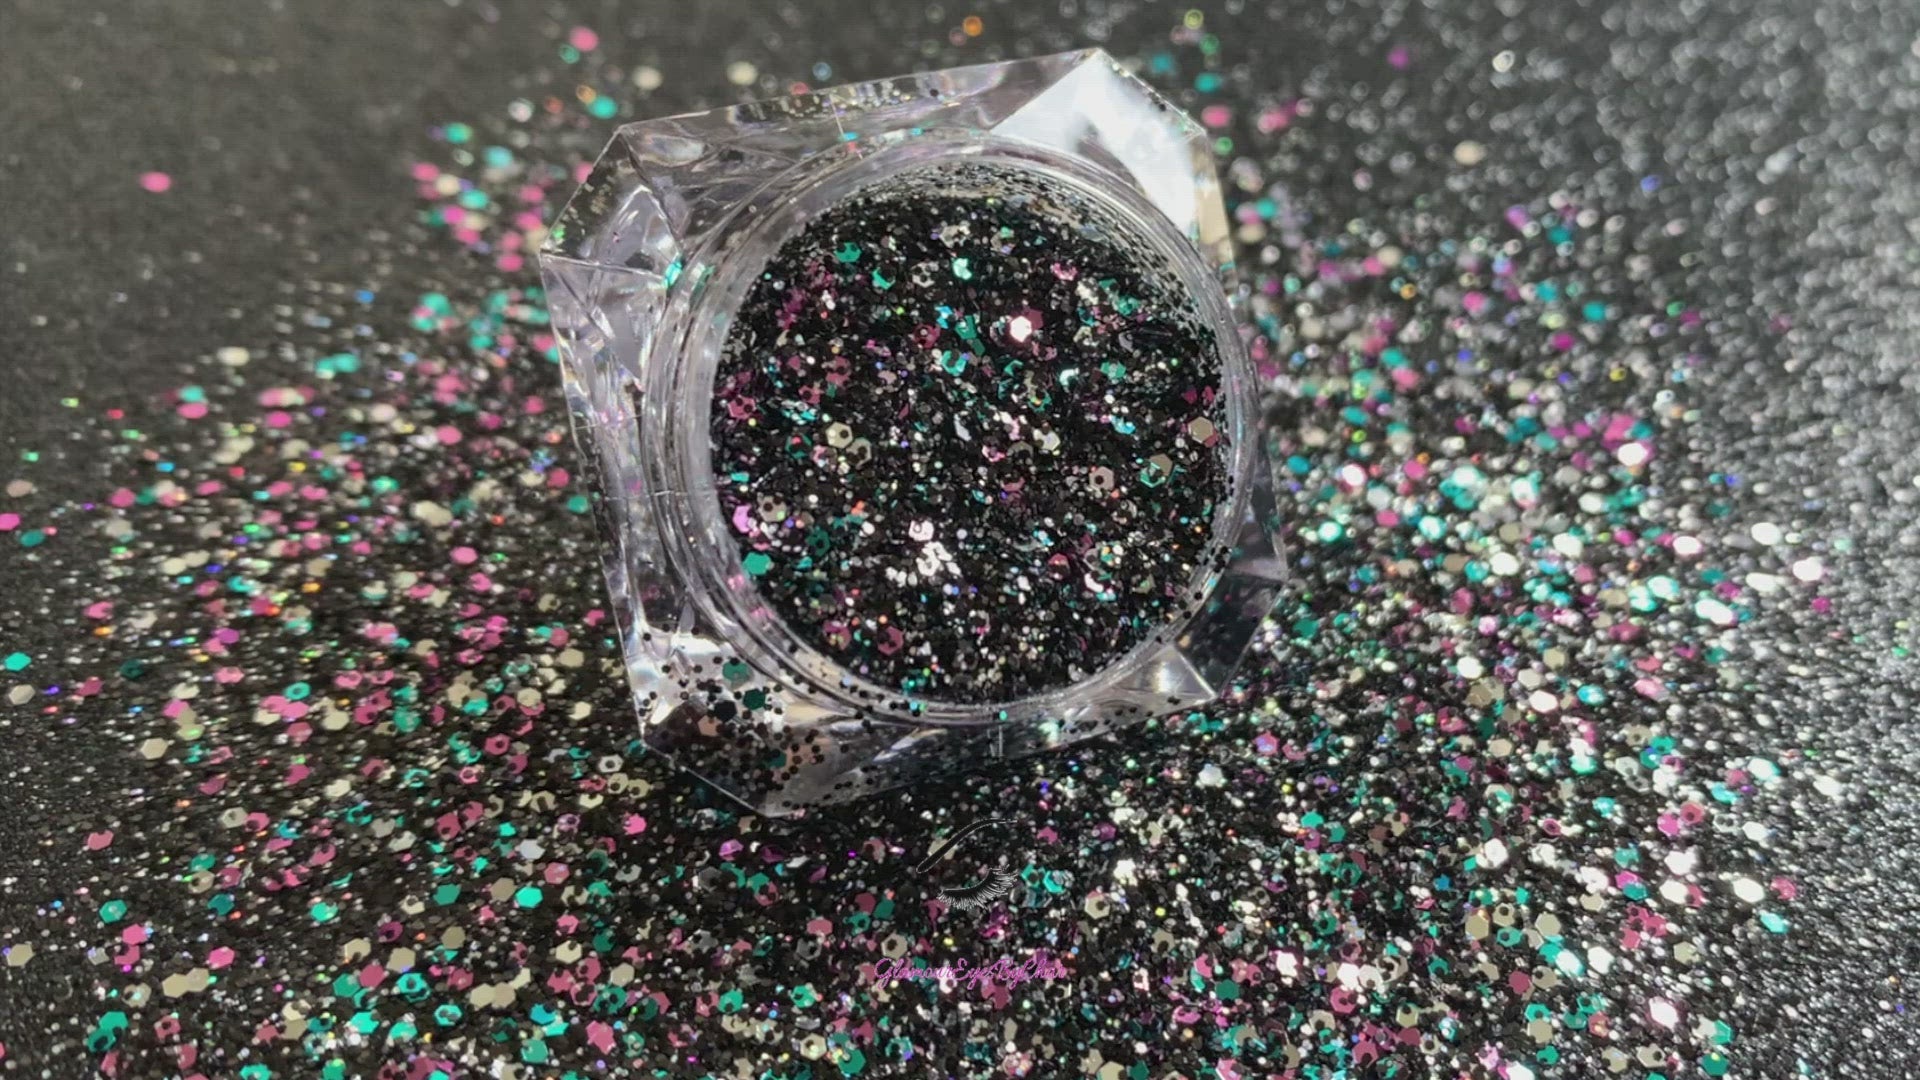 This glitter is called Drama Queen and is part of the chunky glitter collection. It consists of black holographic glitter with a multi-coloured sparkle. Drama Queen can be used for your face, body, hair and nails. Comes in 5g and 10g jars.